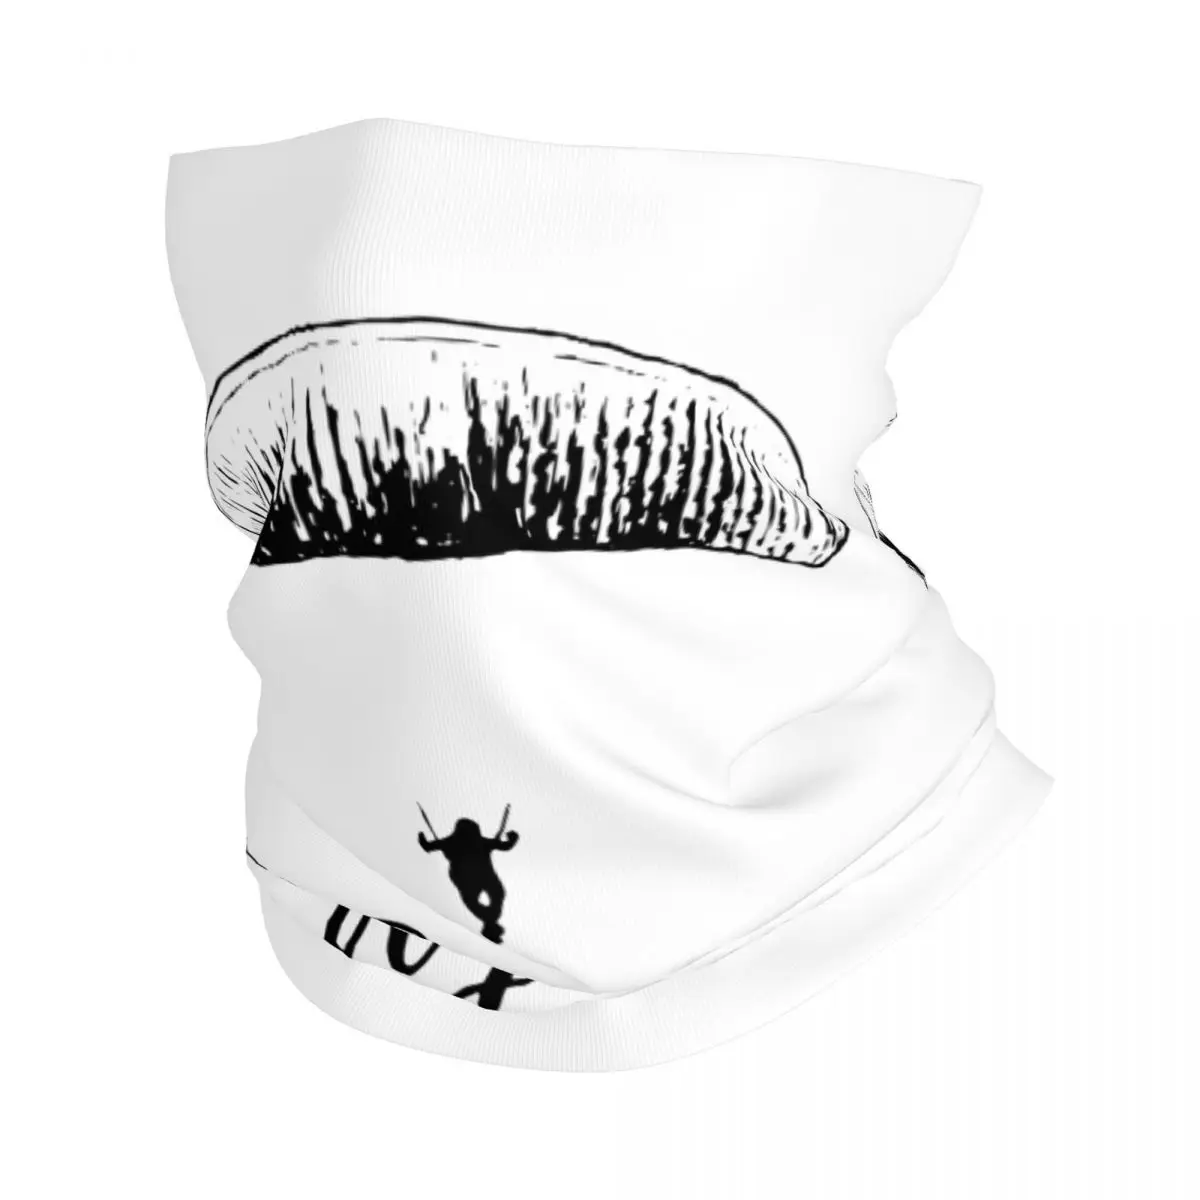 

Paragliding Funny Bandana Neck Cover Printed Cool Paraglider Balaclavas Face Scarf Headwear Running Men Women Adult Windproof